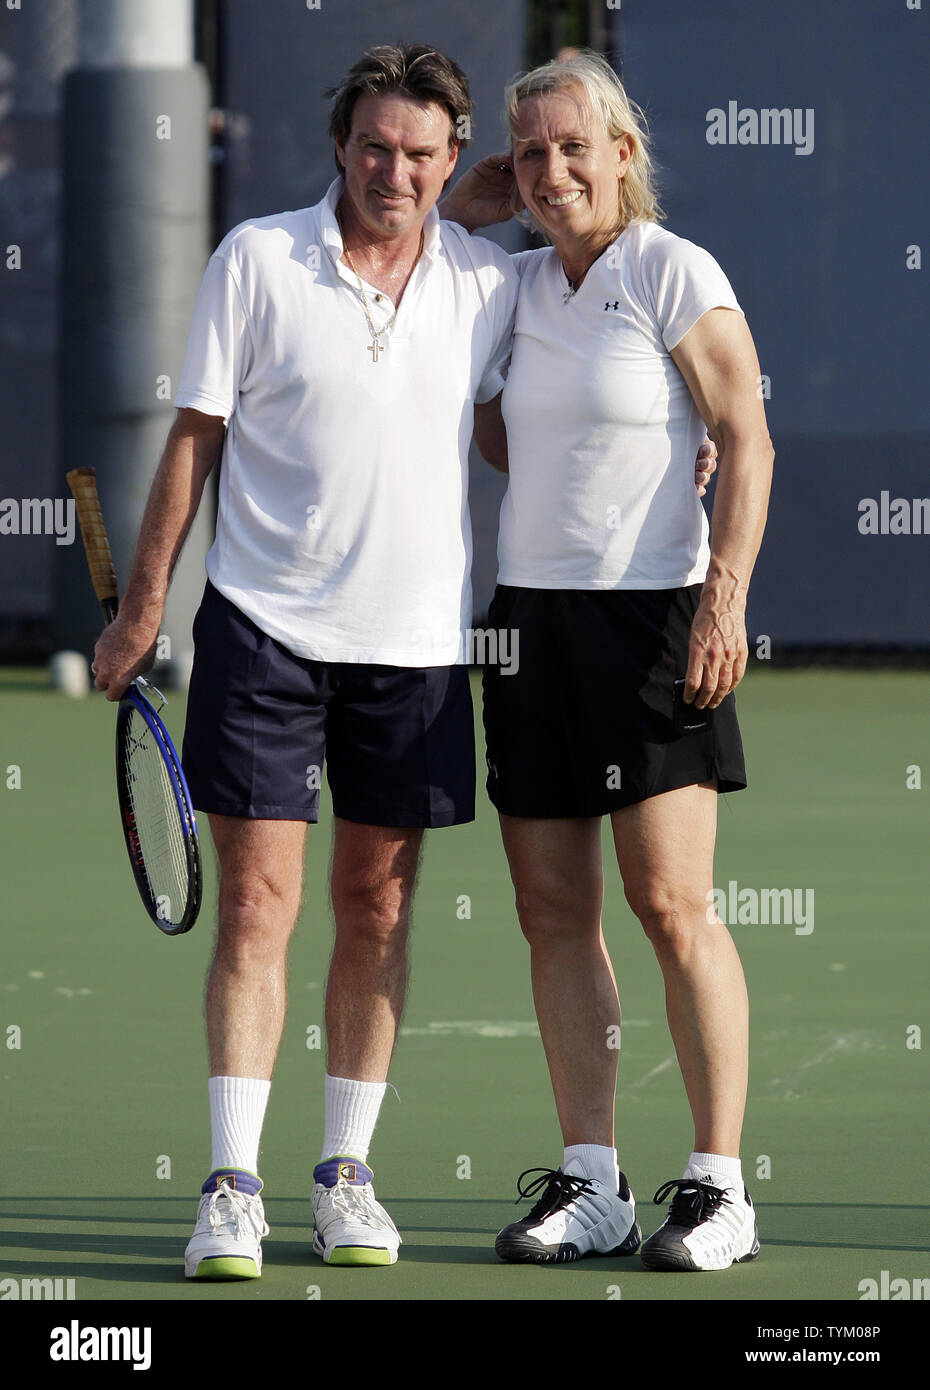 Jimmy Connors and Martina Navratilova stand on the practice courts at the  U.S. Open Tennis Championships in New York City on September 2, 2010.  UPI/John Angelillo Stock Photo - Alamy